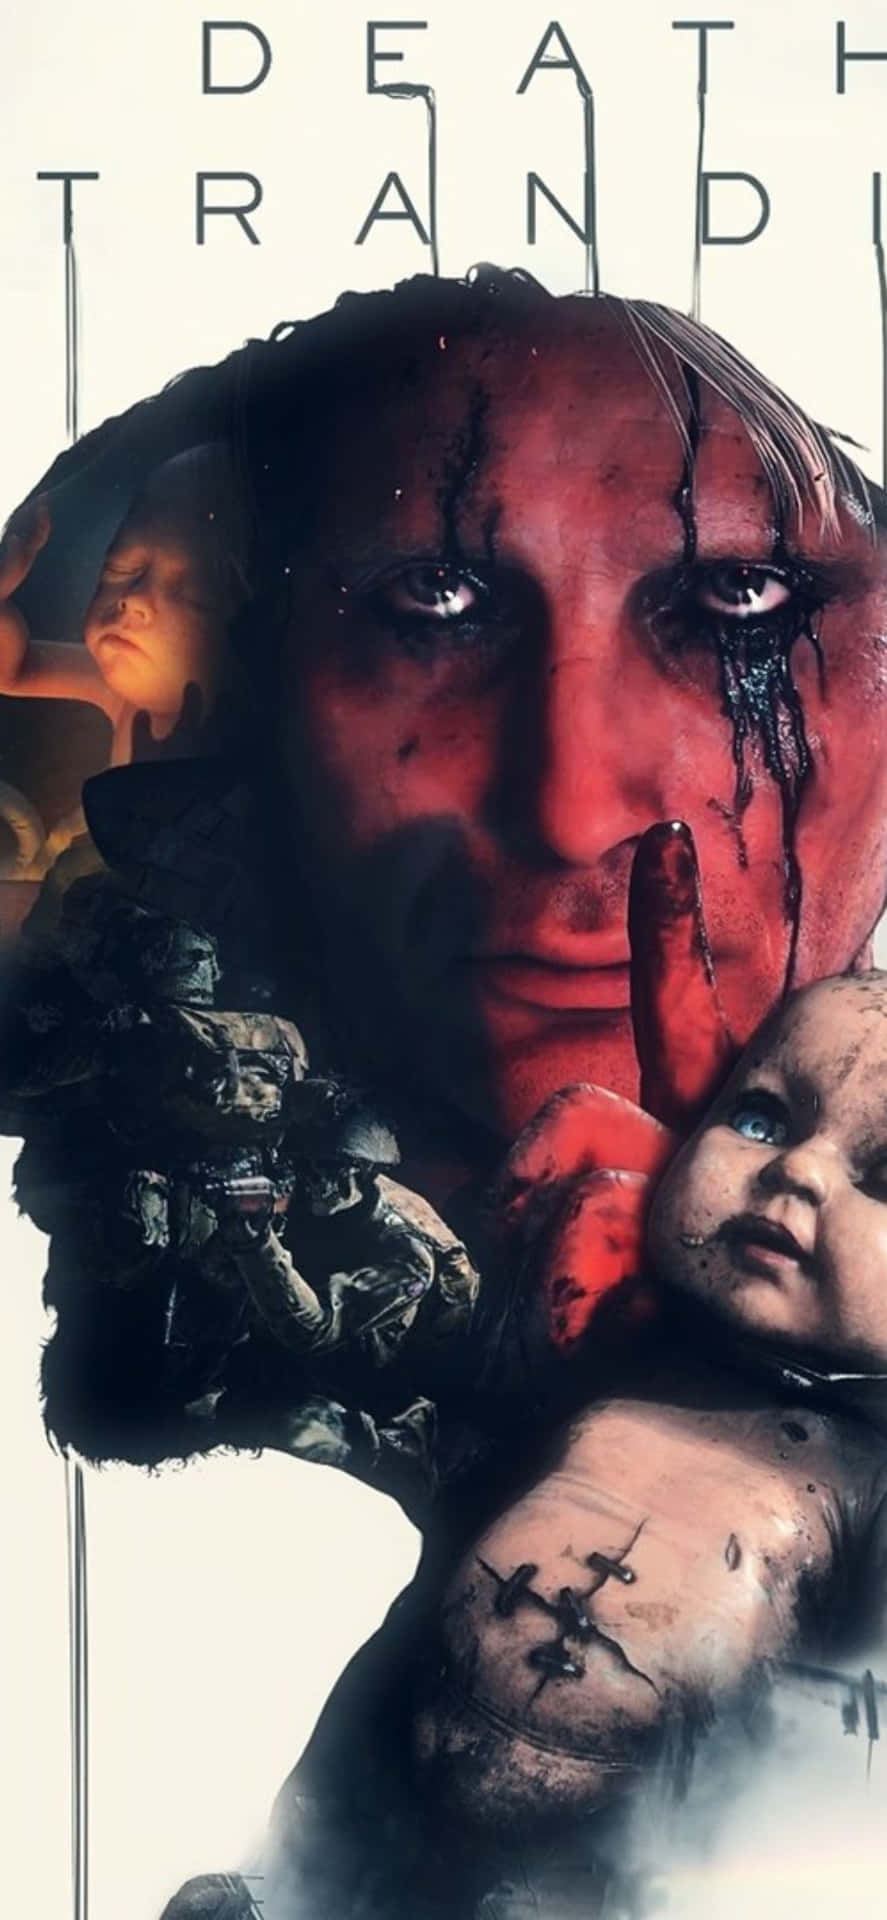 "Explore the post-apocalyptic world of Death Stranding on an Iphone Xs Max"